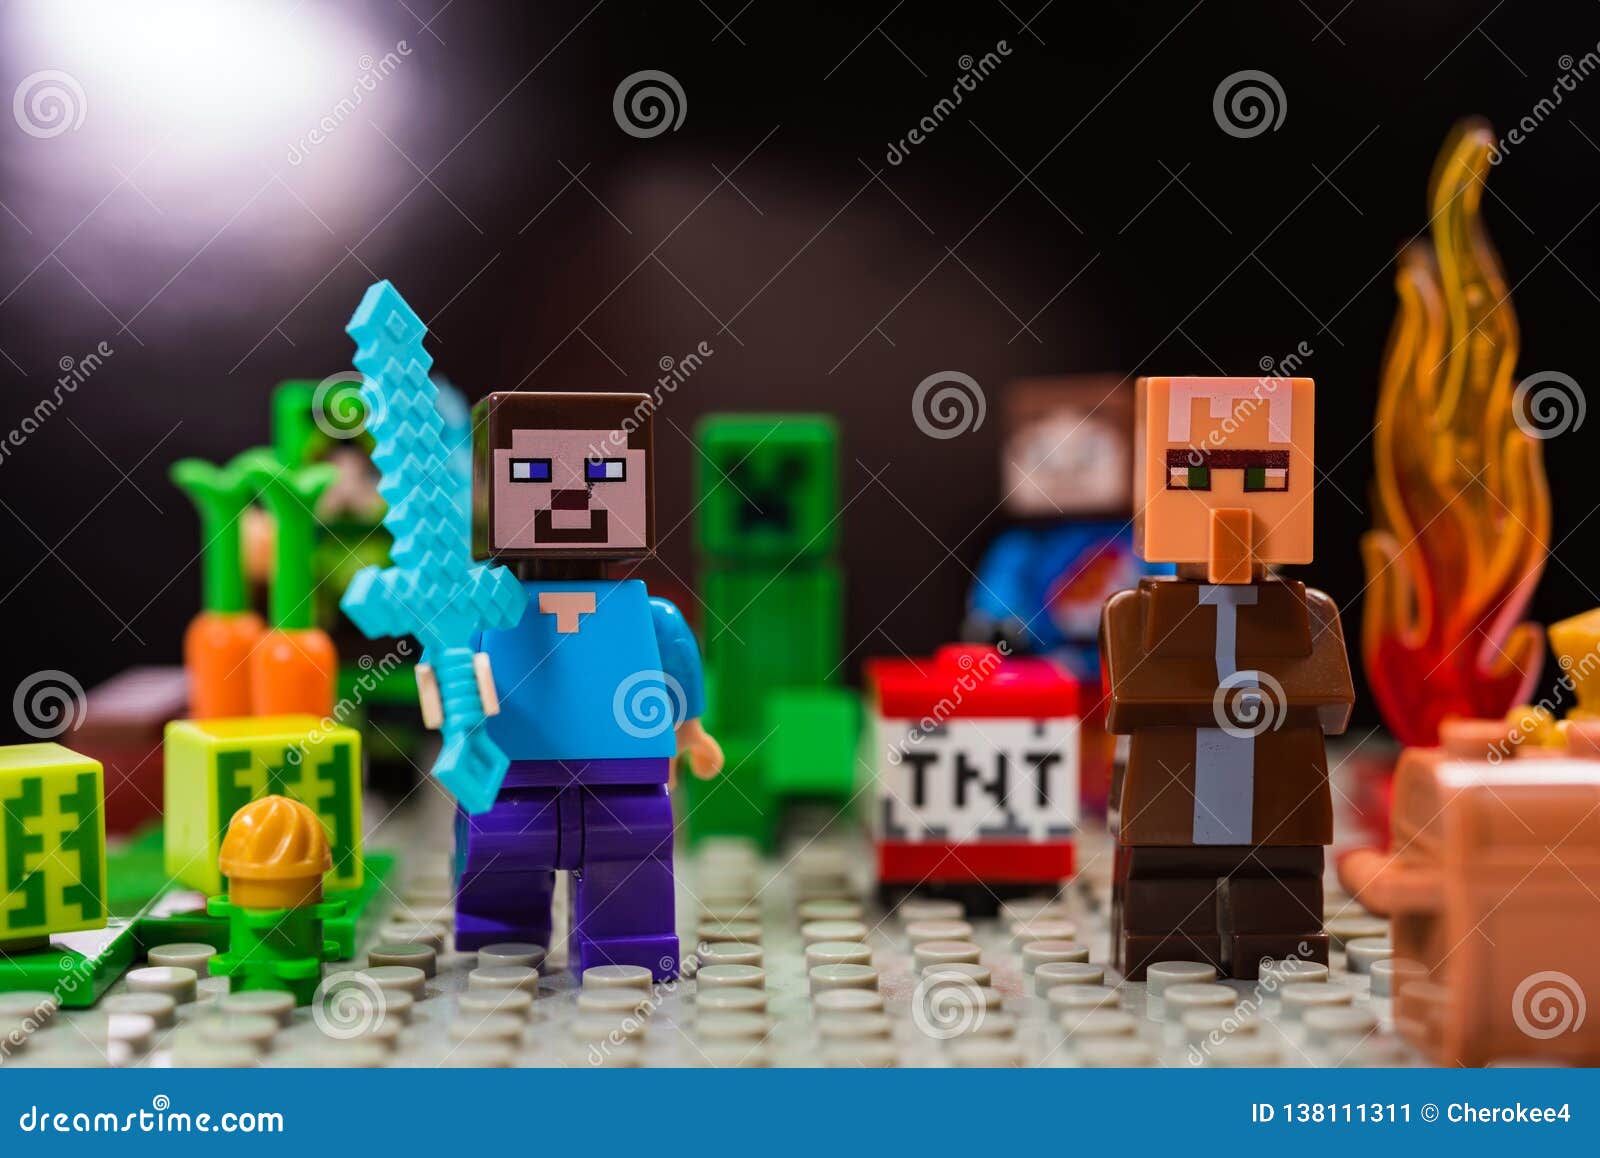 Minifigure Steve With Diamond Sword And Villager Run Away From The Creeper Characters Of The Game Minecraft Editorial Photo Image Of Editorial Villager